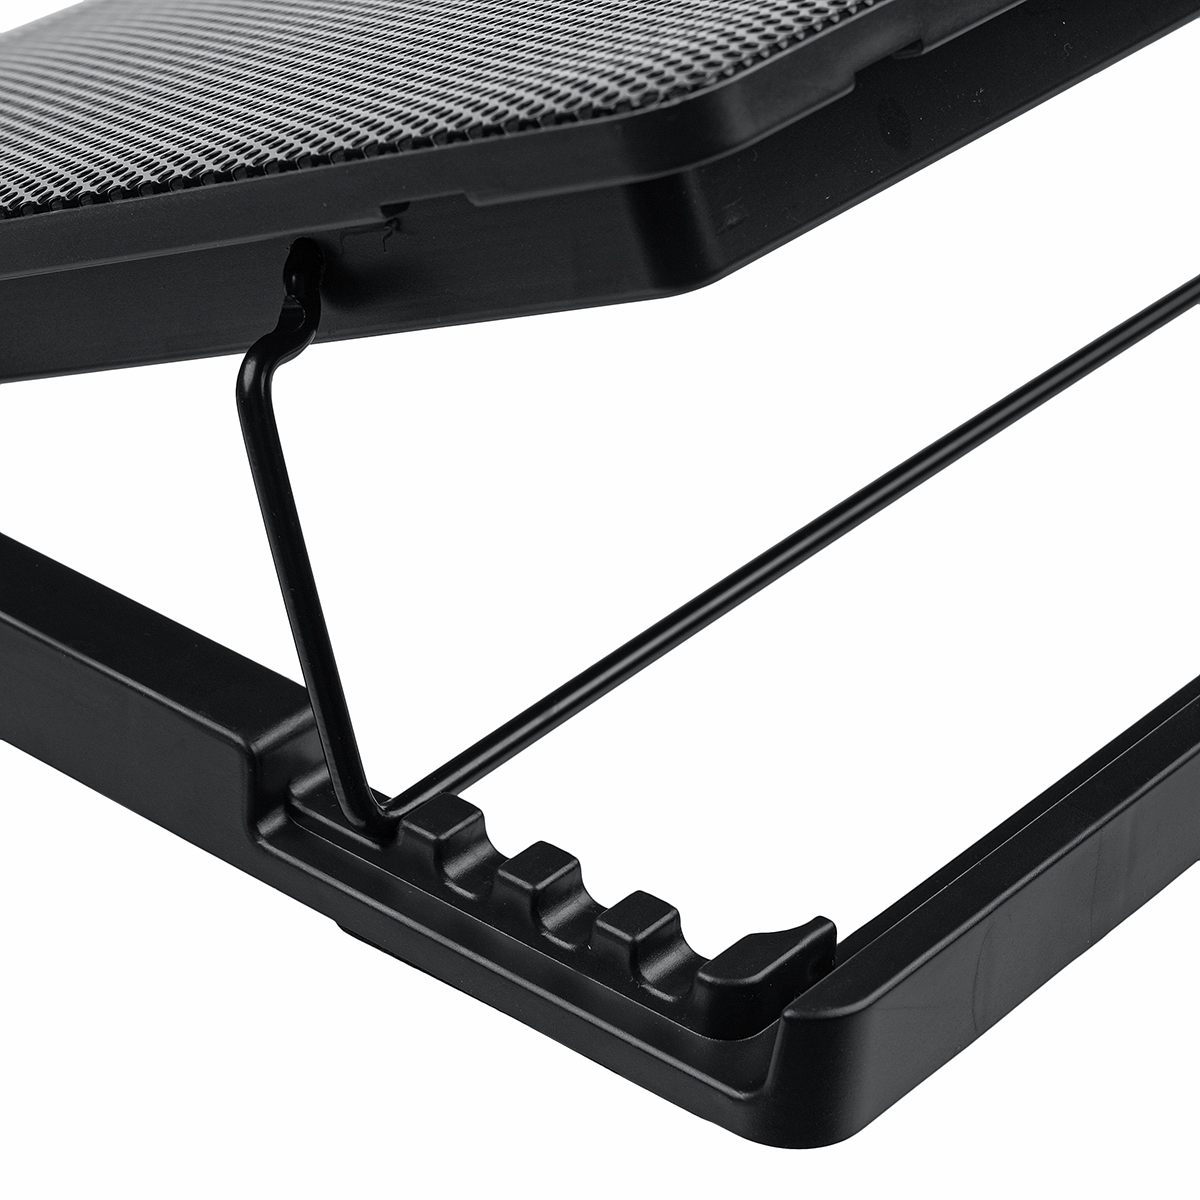 Find 6 Fan Adjustable Laptop Cooling Pad Cooler Portable Stand For 14-17inch Laptop for Sale on Gipsybee.com with cryptocurrencies